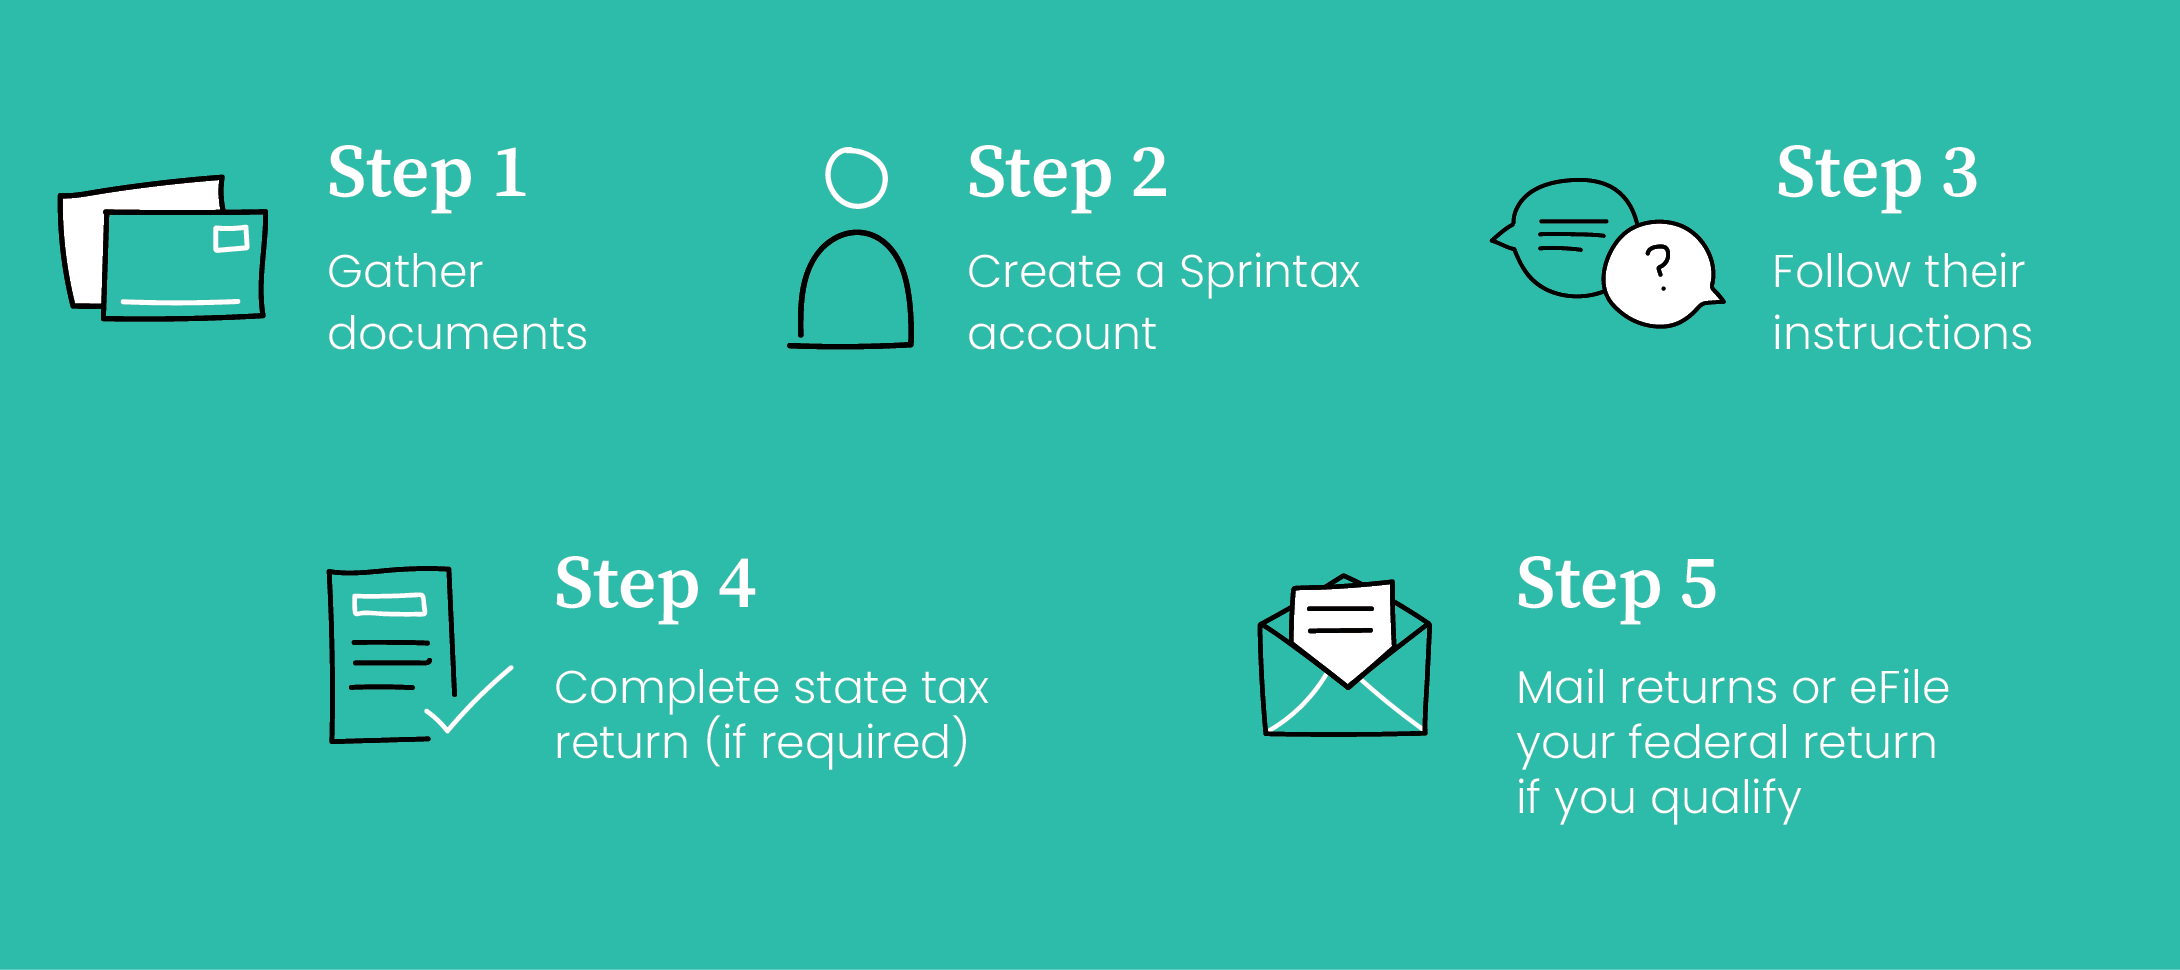 Spintax Timeline: 1) Gather documents 2) Create a Sprintax account 3) Follow their instructions 4) Complete state tax return (if required) 5) Mail forms to IRS